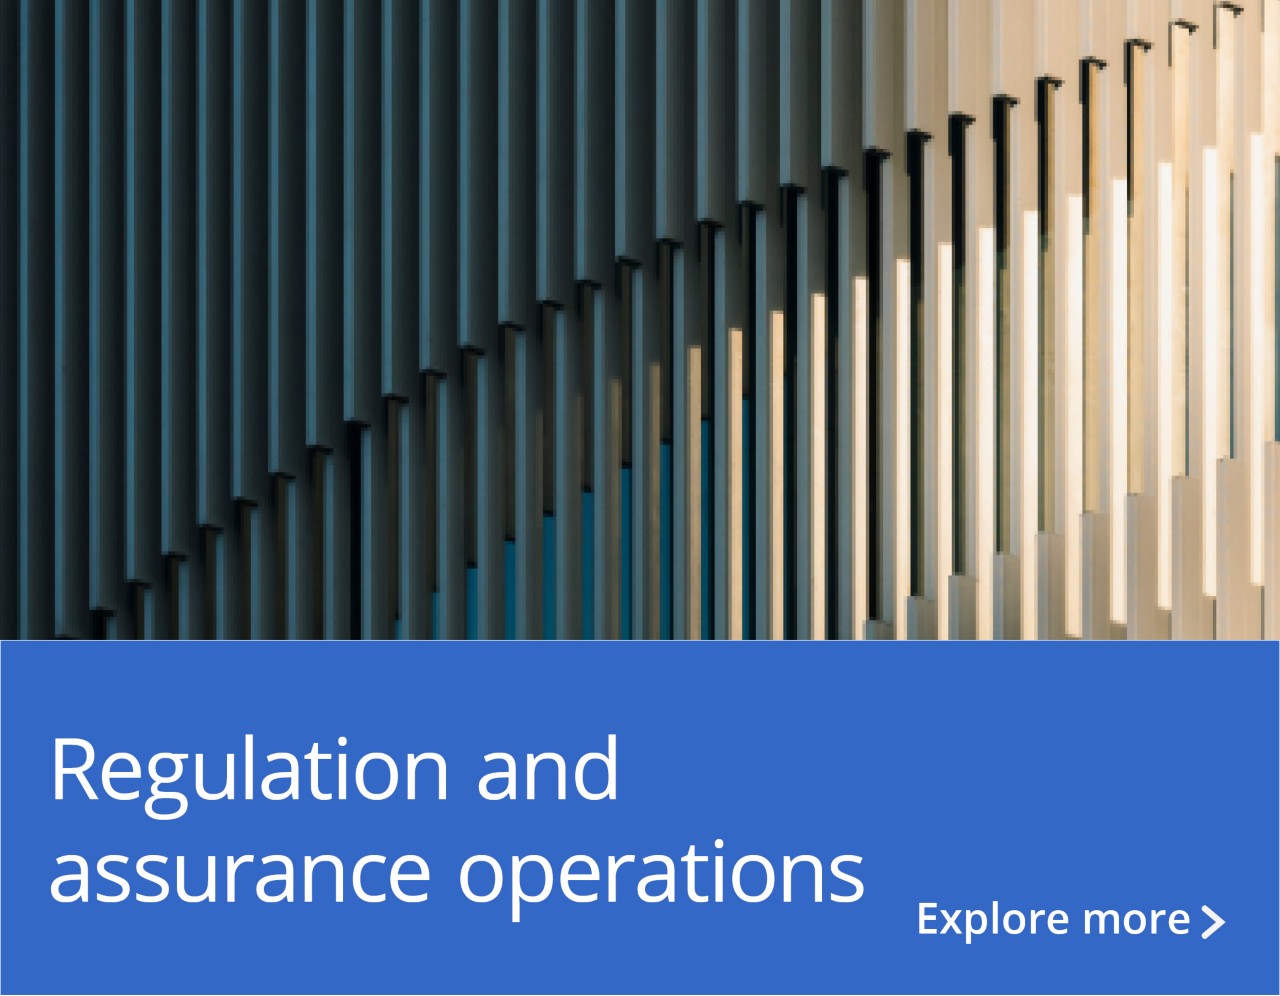 Sub section 1: Regulation and assurance operations 